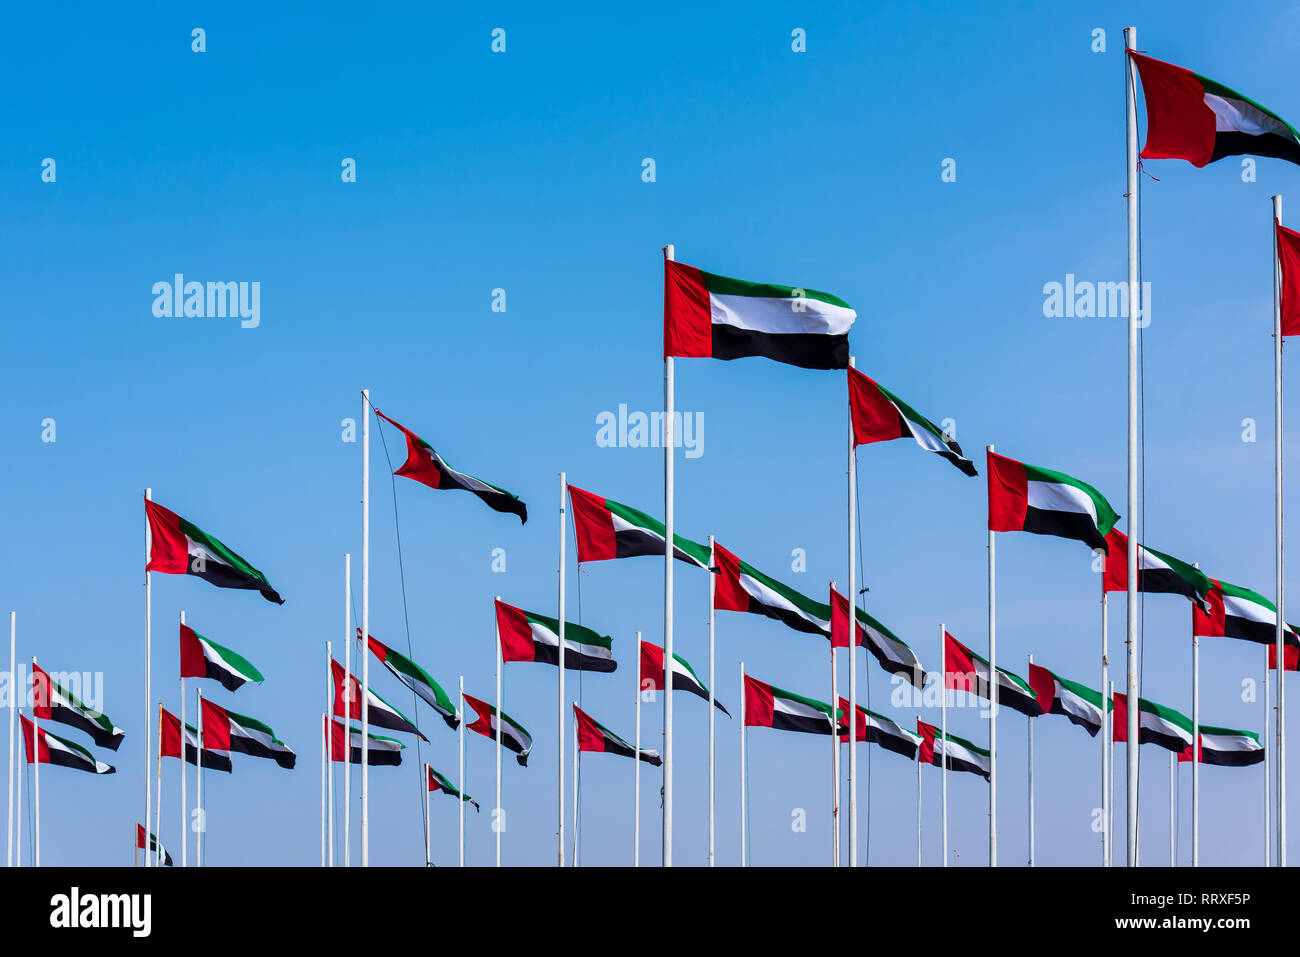 Many United Arab Emirates flags winding in the wind against blue sky Stock Photo